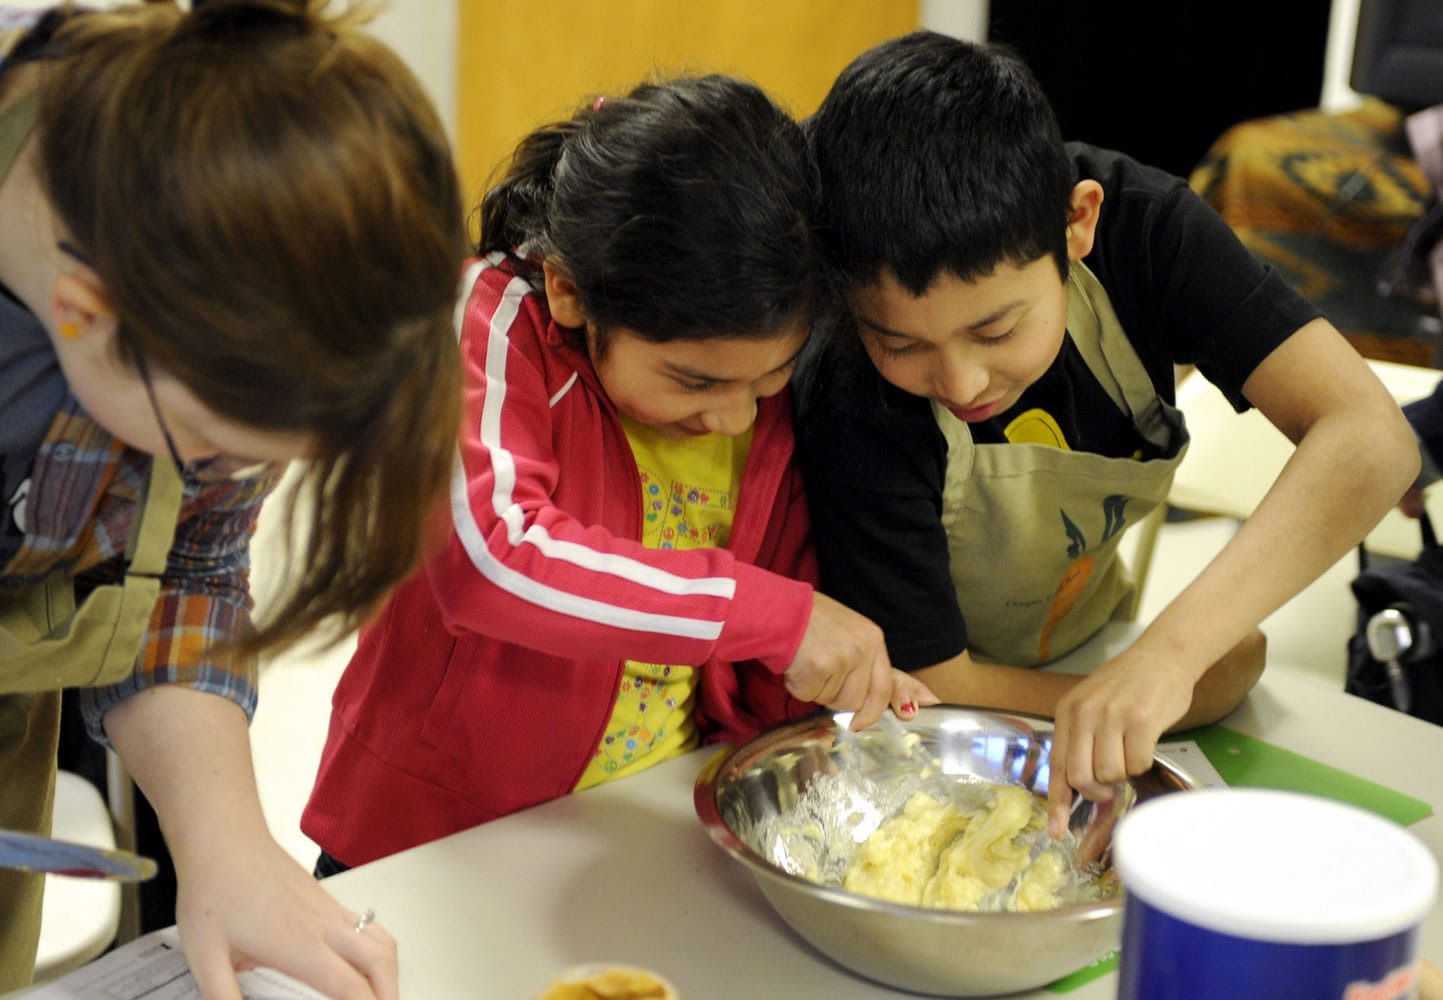 Seudy Bolon and her brother Alexander Bolon Manrero, right, mix dough for oatmeal cookies during a nutrition education class offered by a Vancouver food pantry.